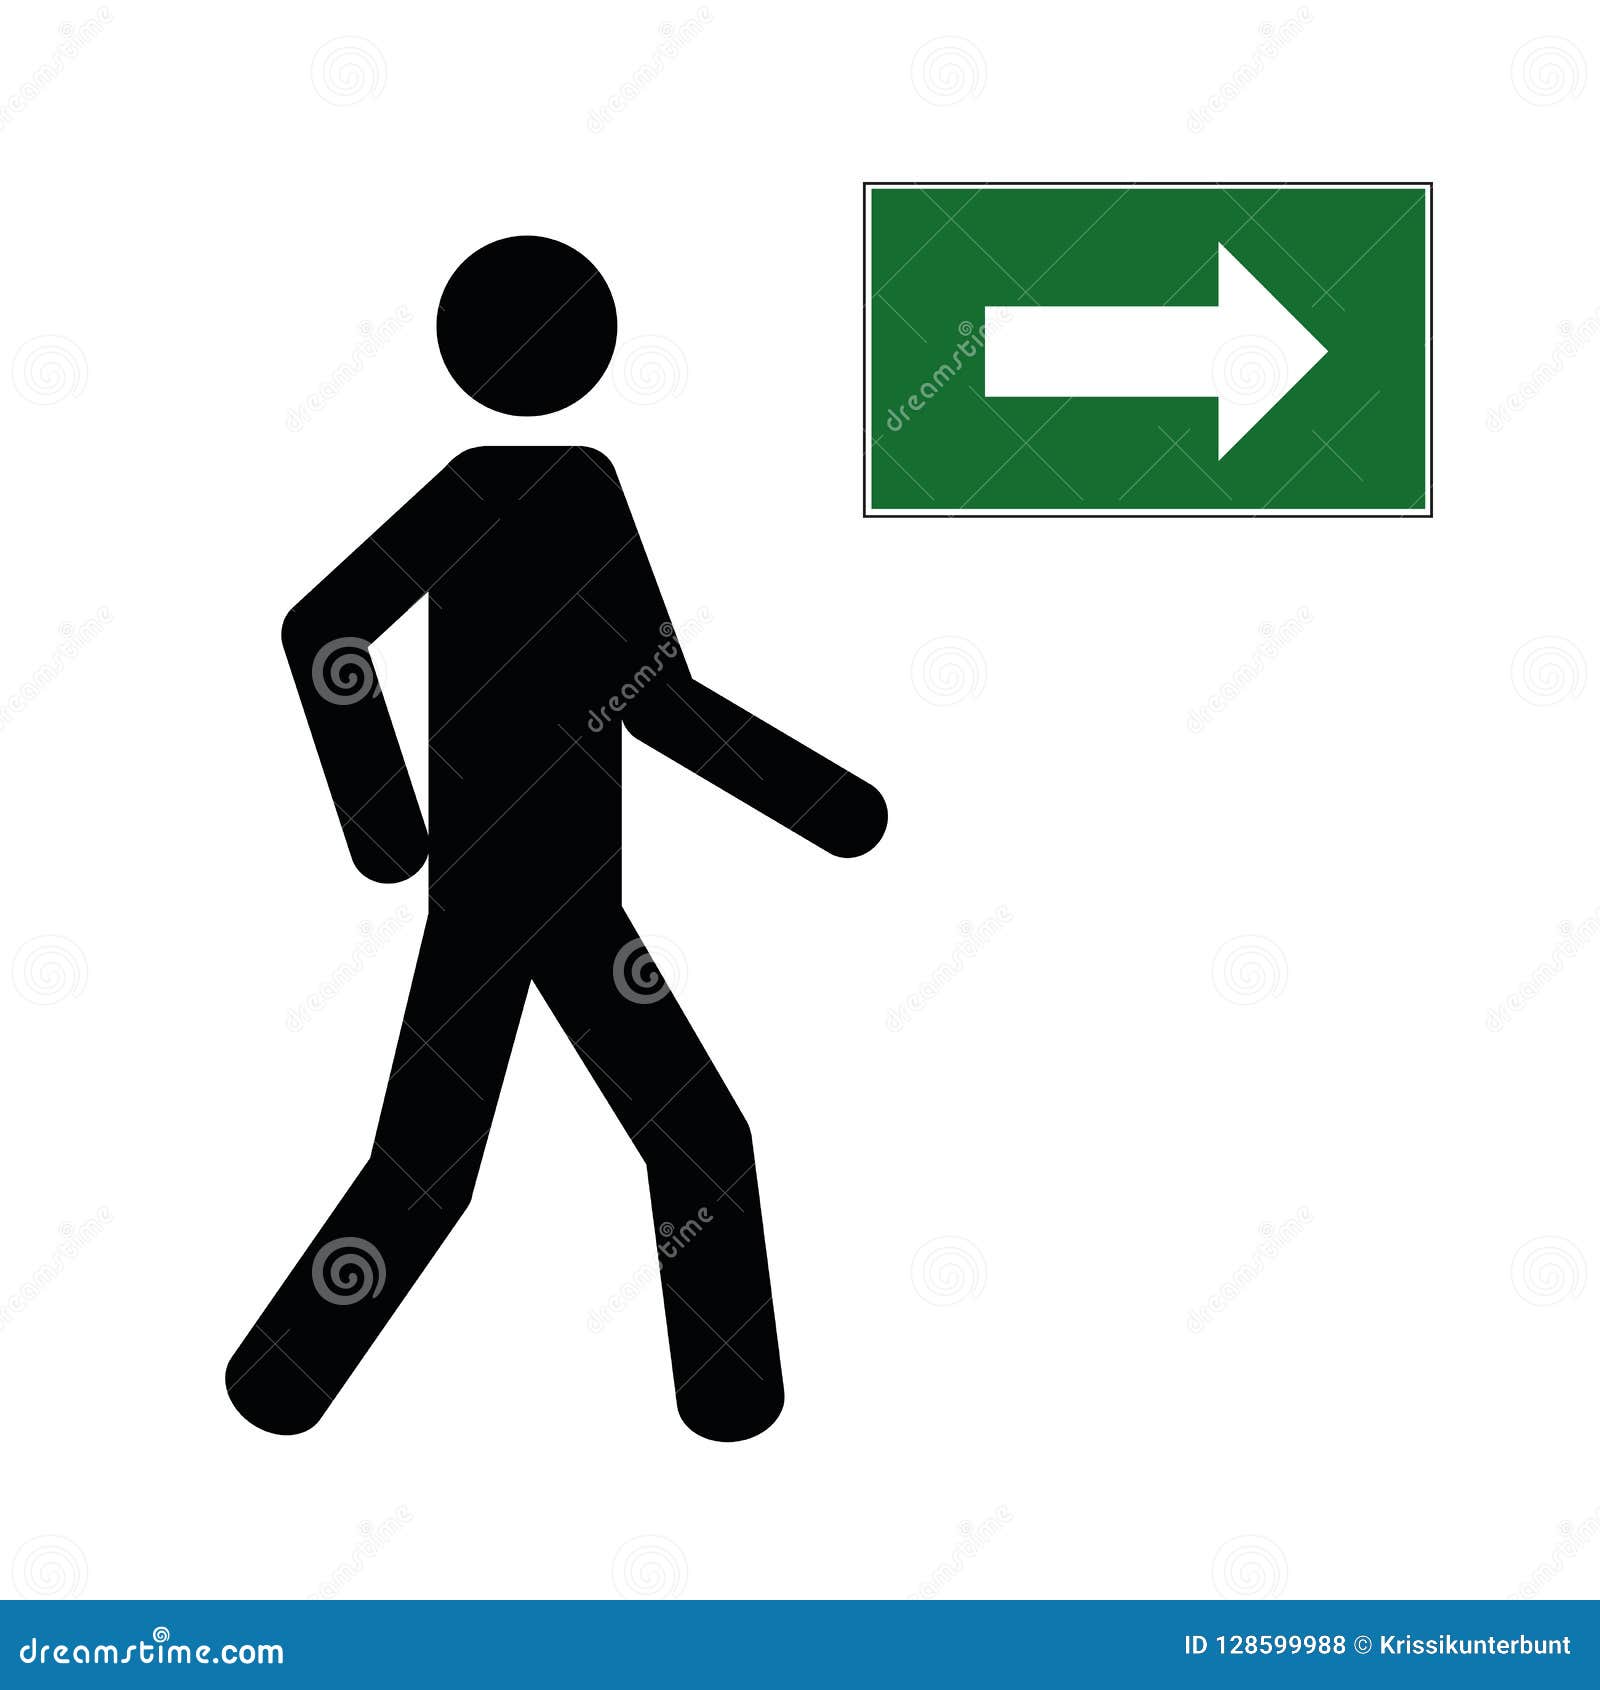 man walking by foot icon pedestrian pictogram with green arrow